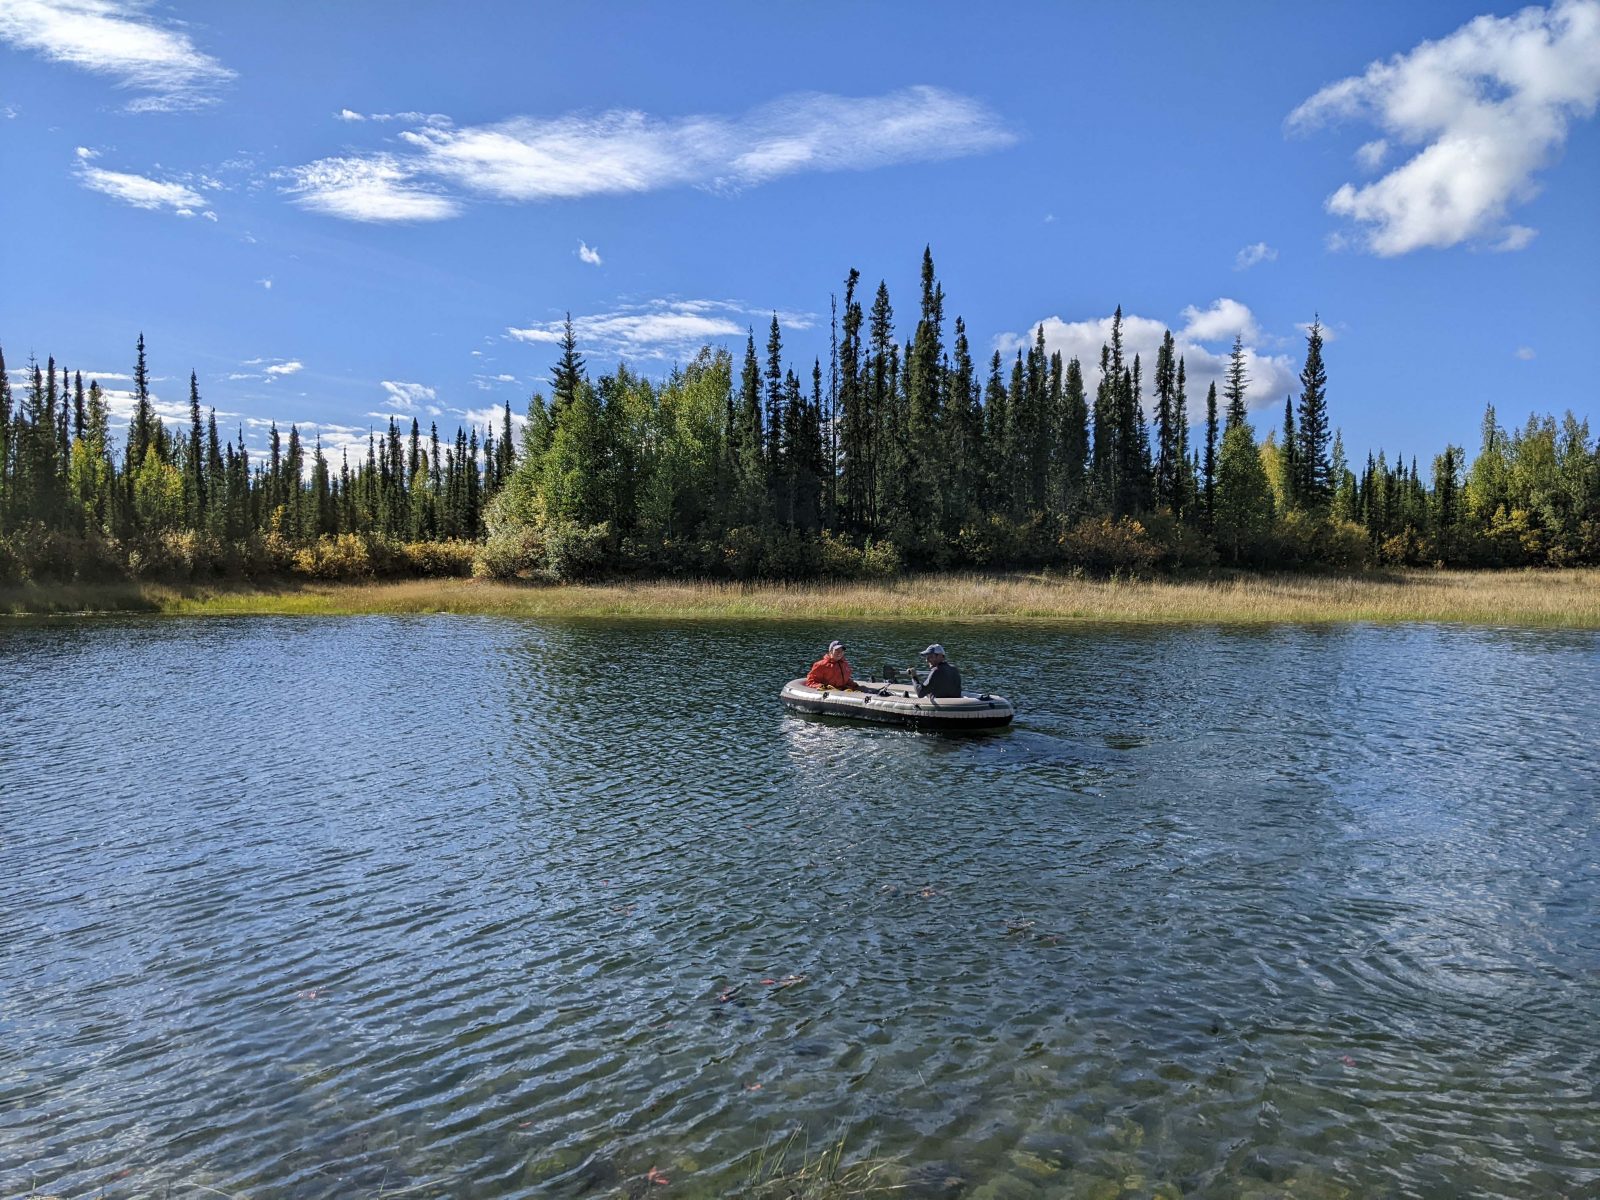 Long-distance view of a small dinghy in the middle of a blue lake surrounded by grasses and a conifer forest.